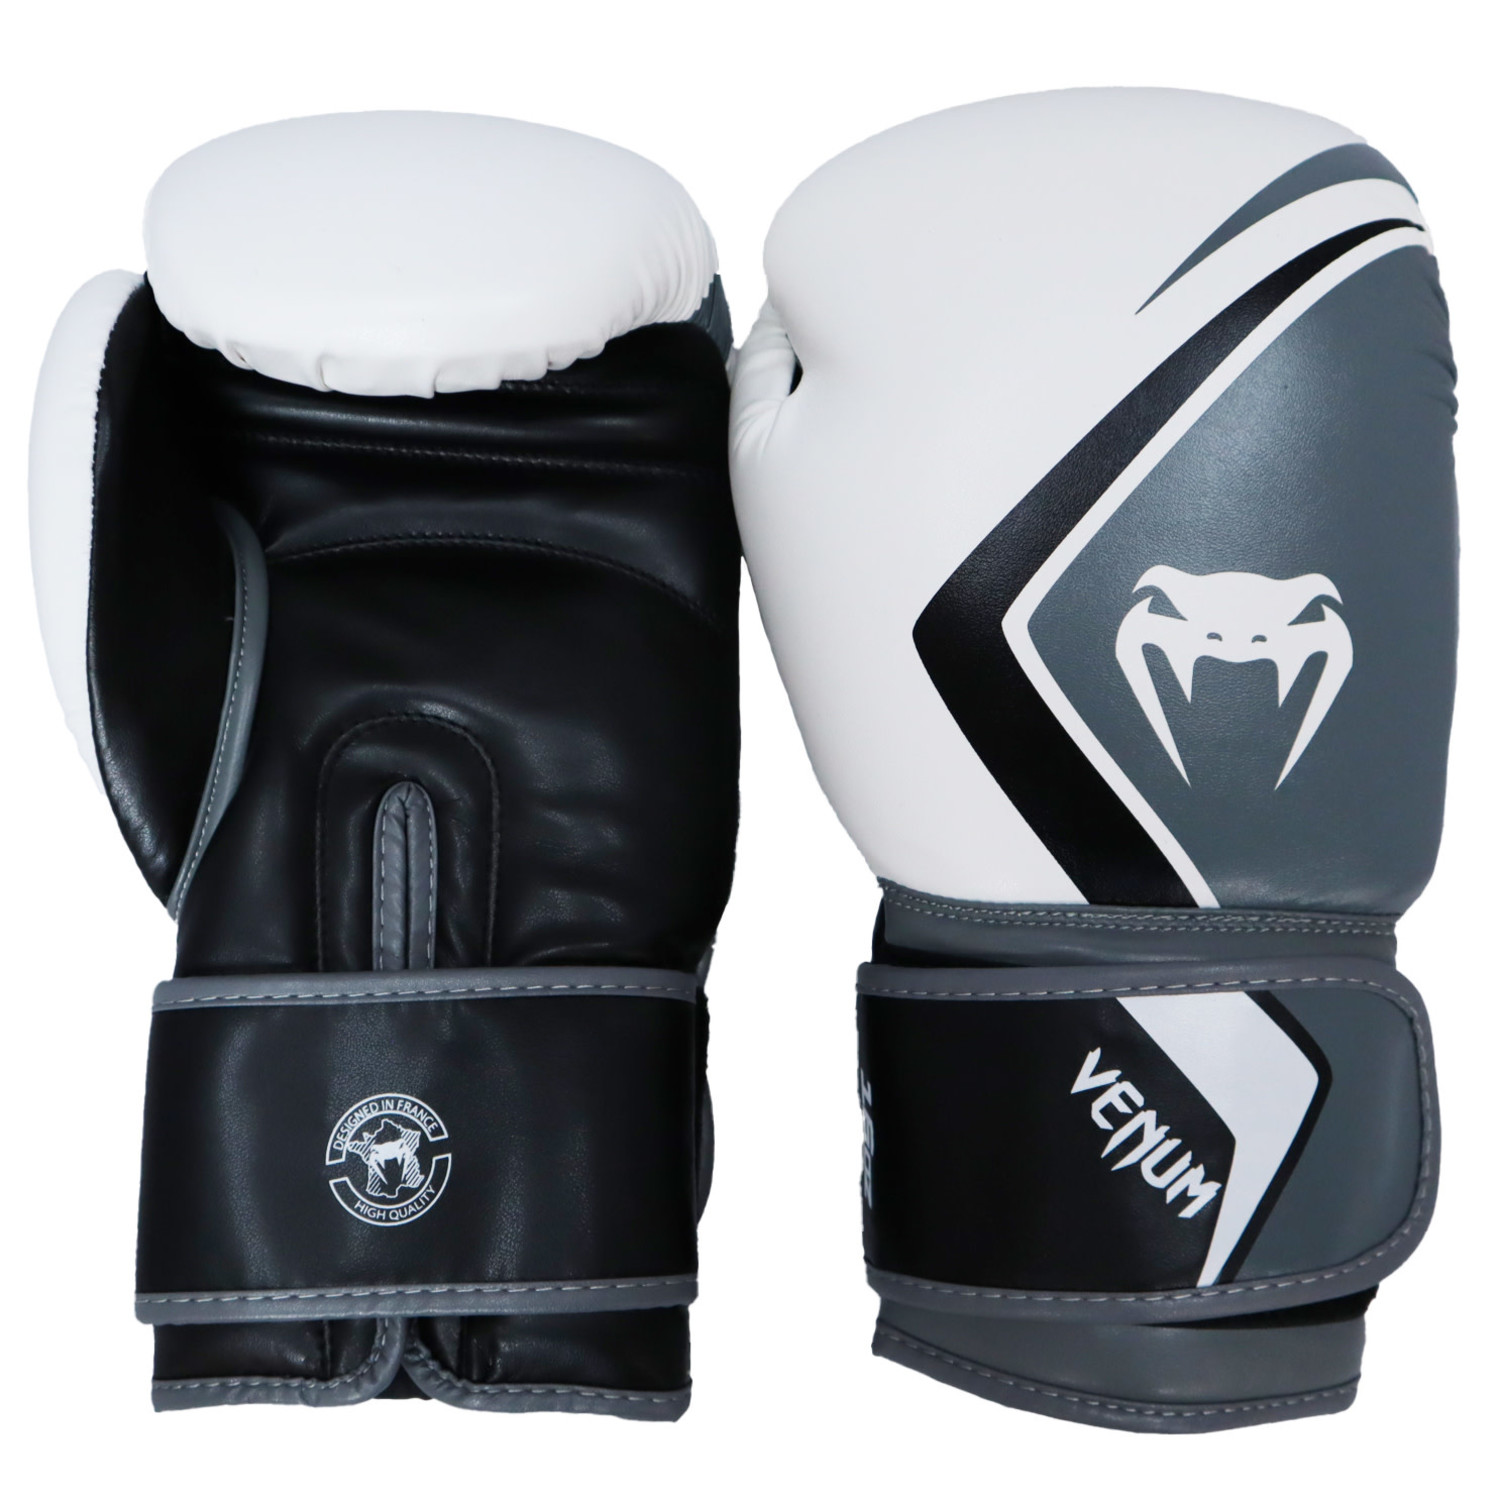 Venum Boxing Gloves White Contender 2.0 for Boxing and MMA - Enso